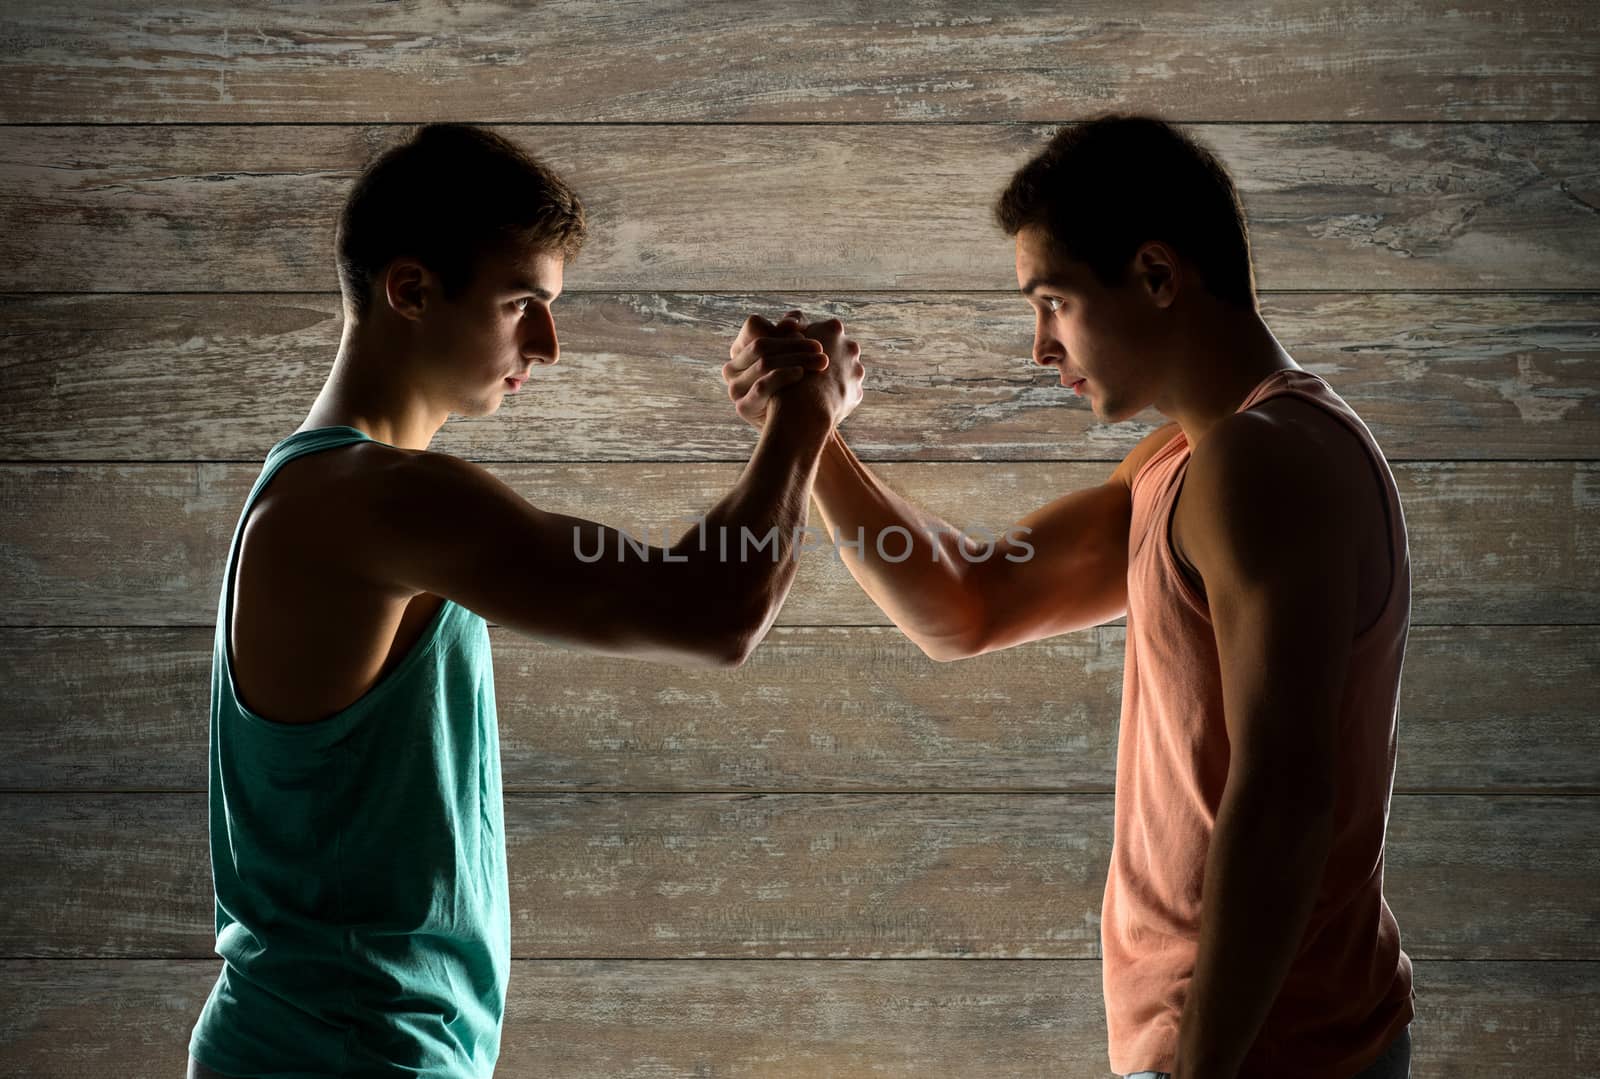 sport, competition, strength and people concept - two young men arm wrestling over wooden wall background